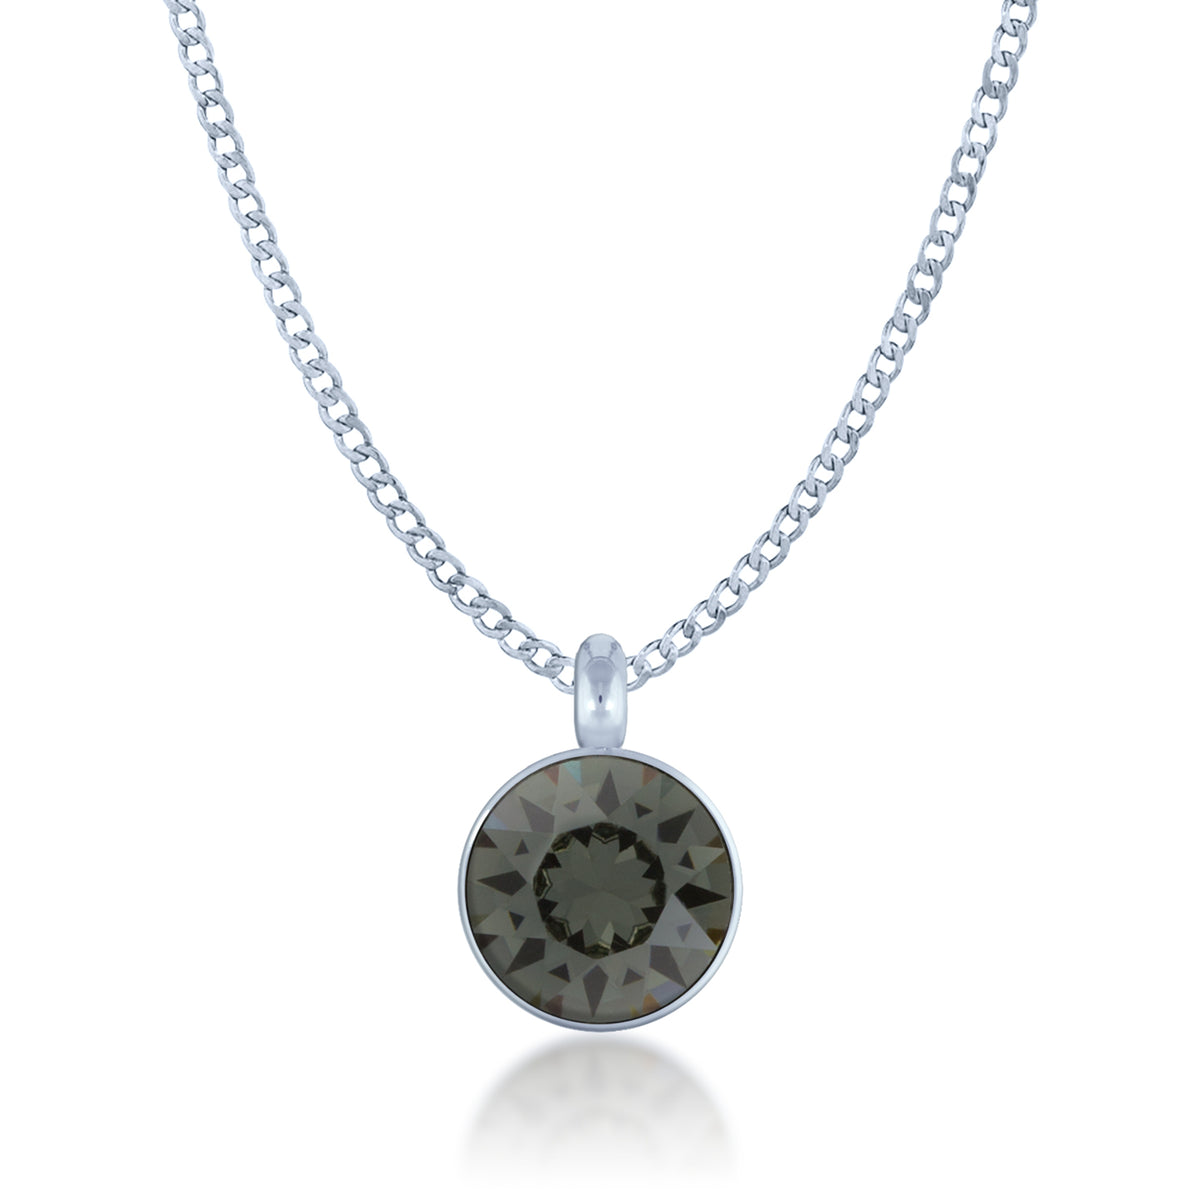 Bella Pendant Necklace with Black Diamond Round Crystals from Swarovski Silver Toned Rhodium Plated - Ed Heart